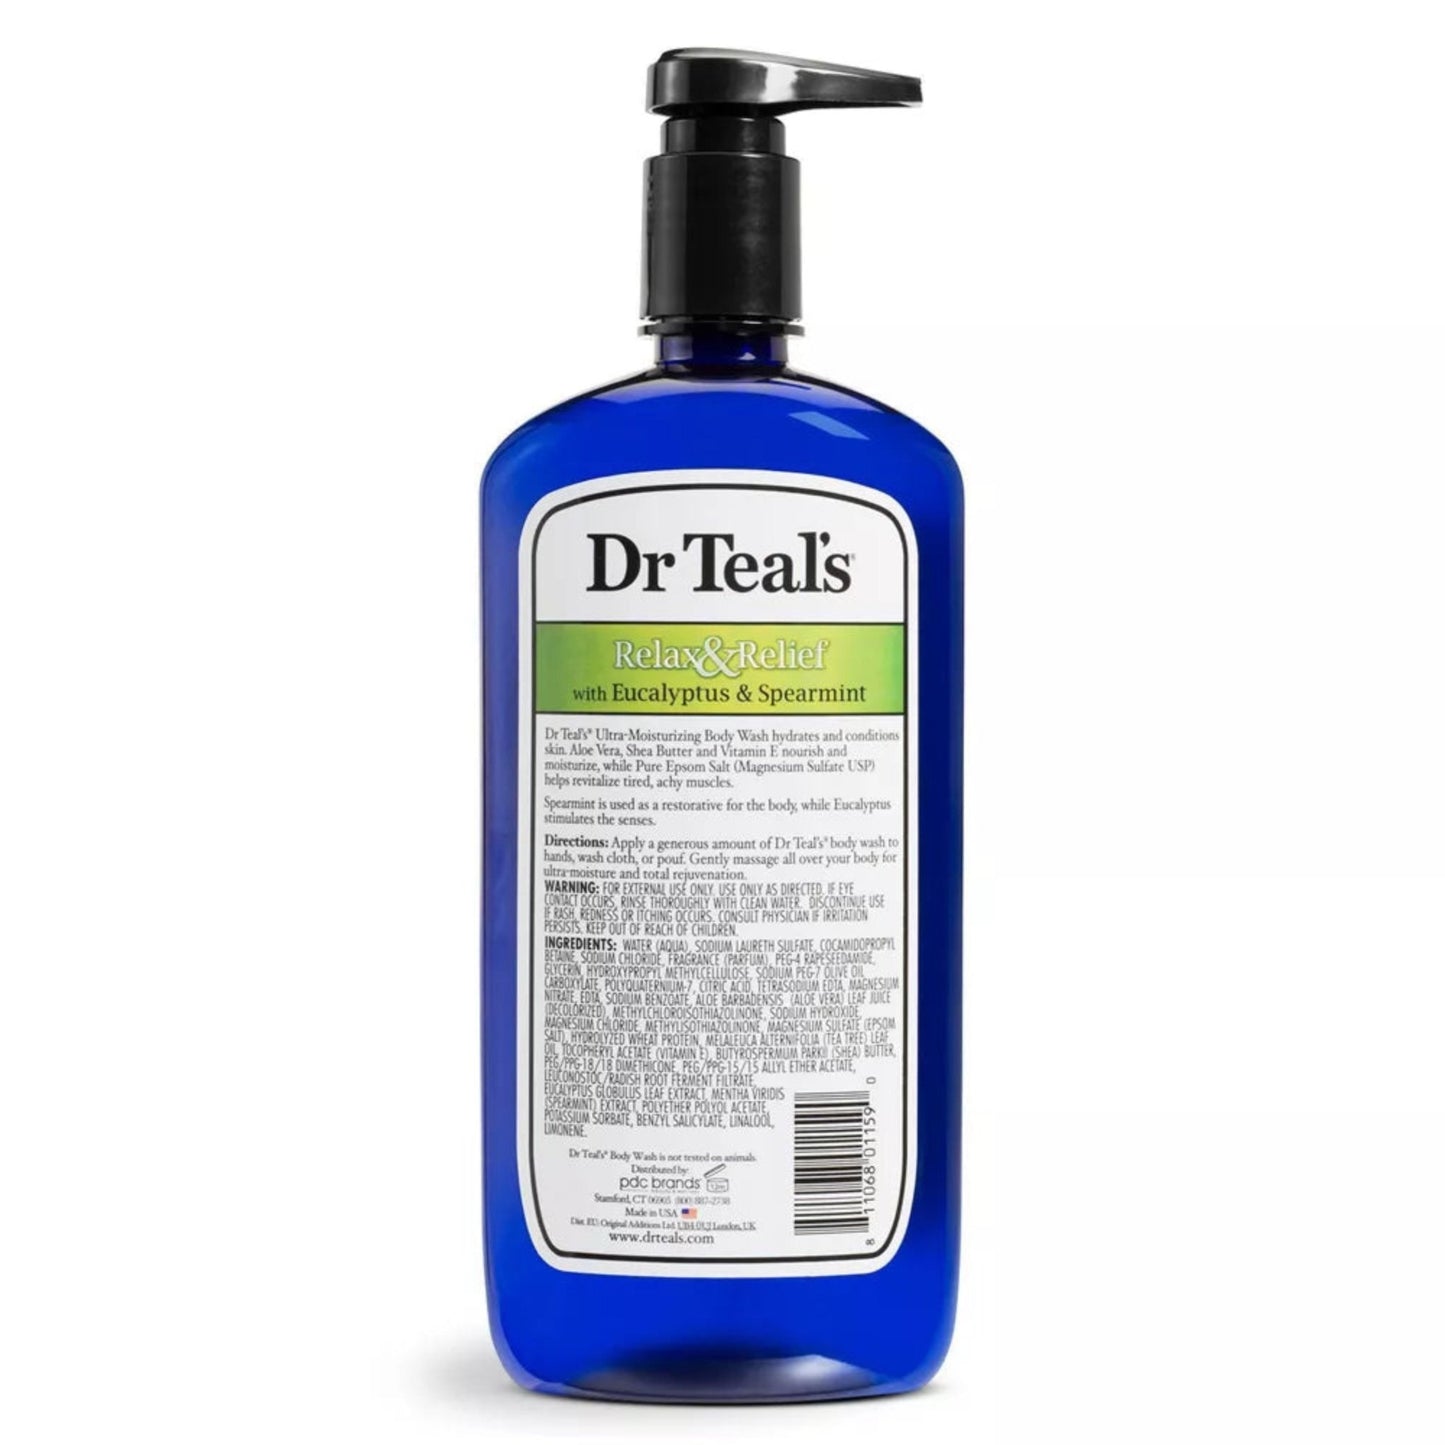 Dr Teal's Relax & Relief Eucalyptus & Spearmint Body Wash - (710mL)